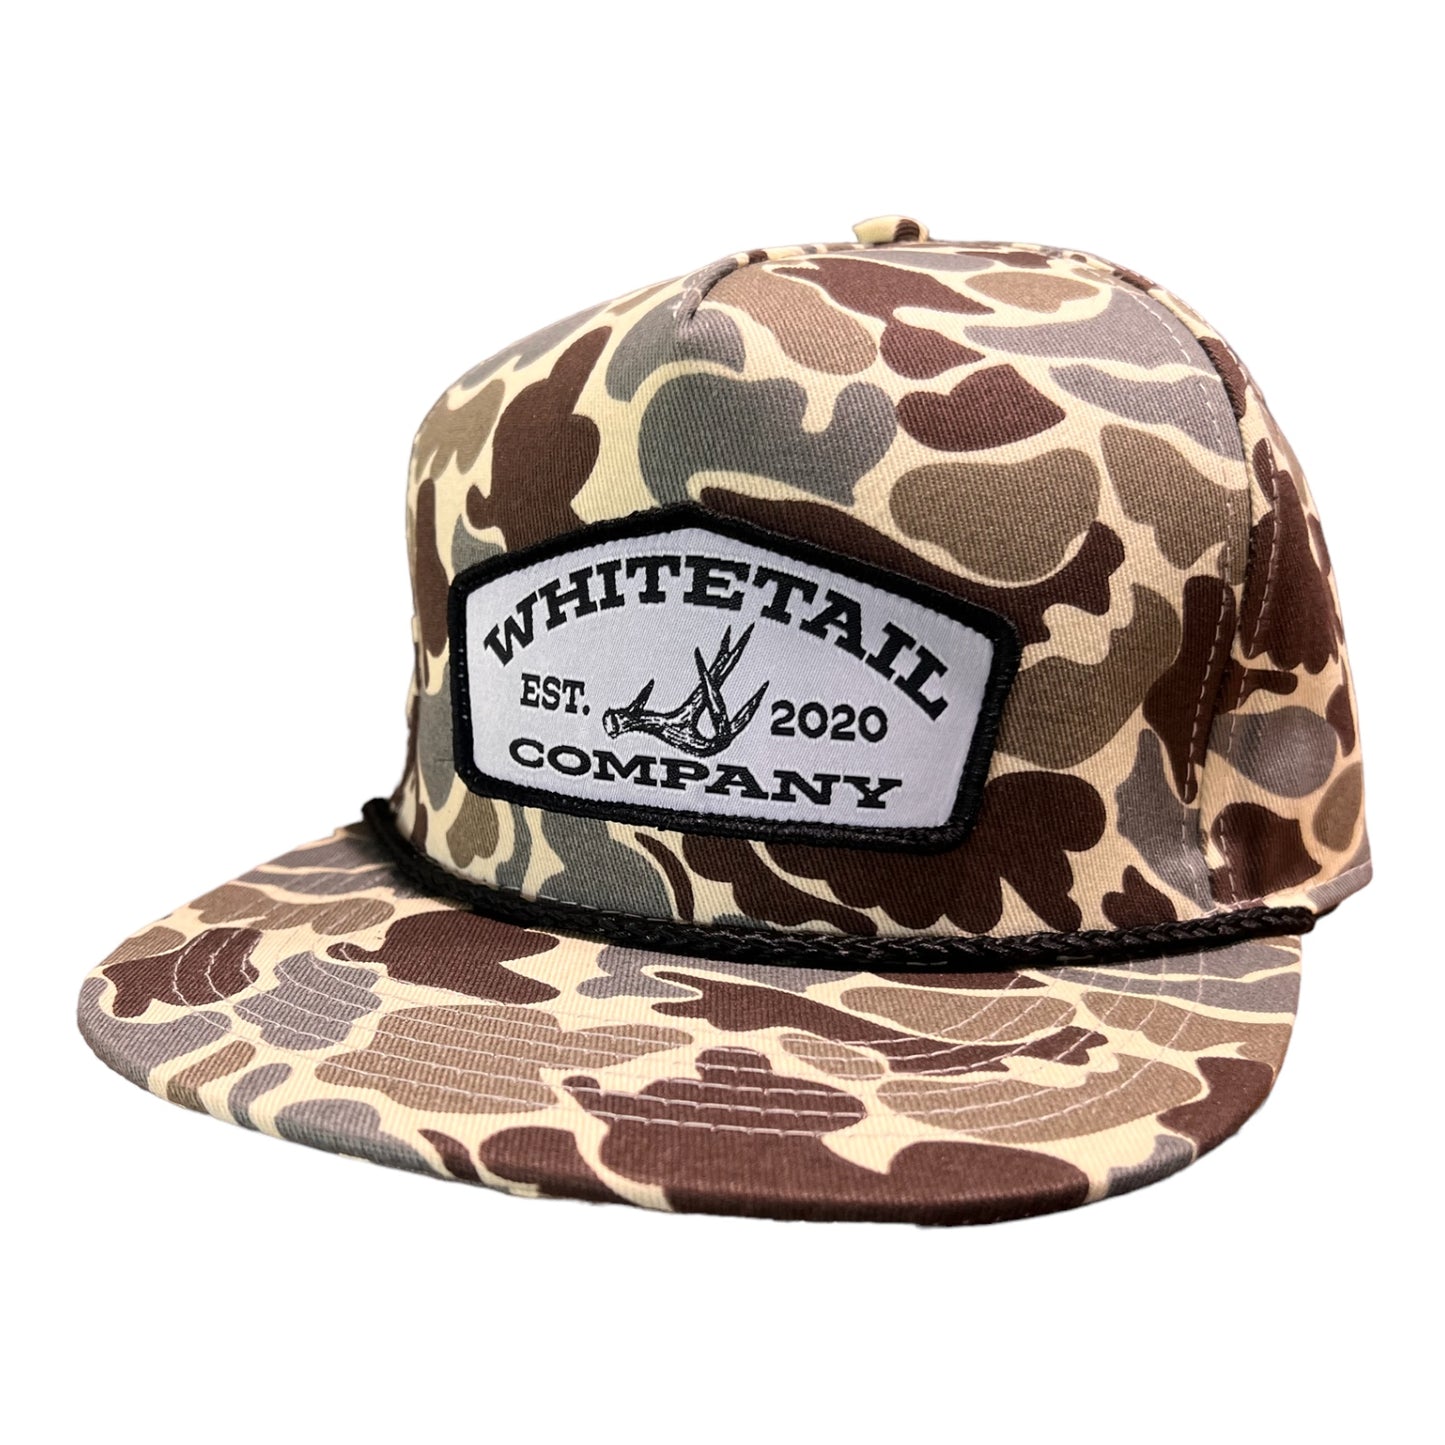 Whitetail Co. Duck Camo Trucker Shed Patch